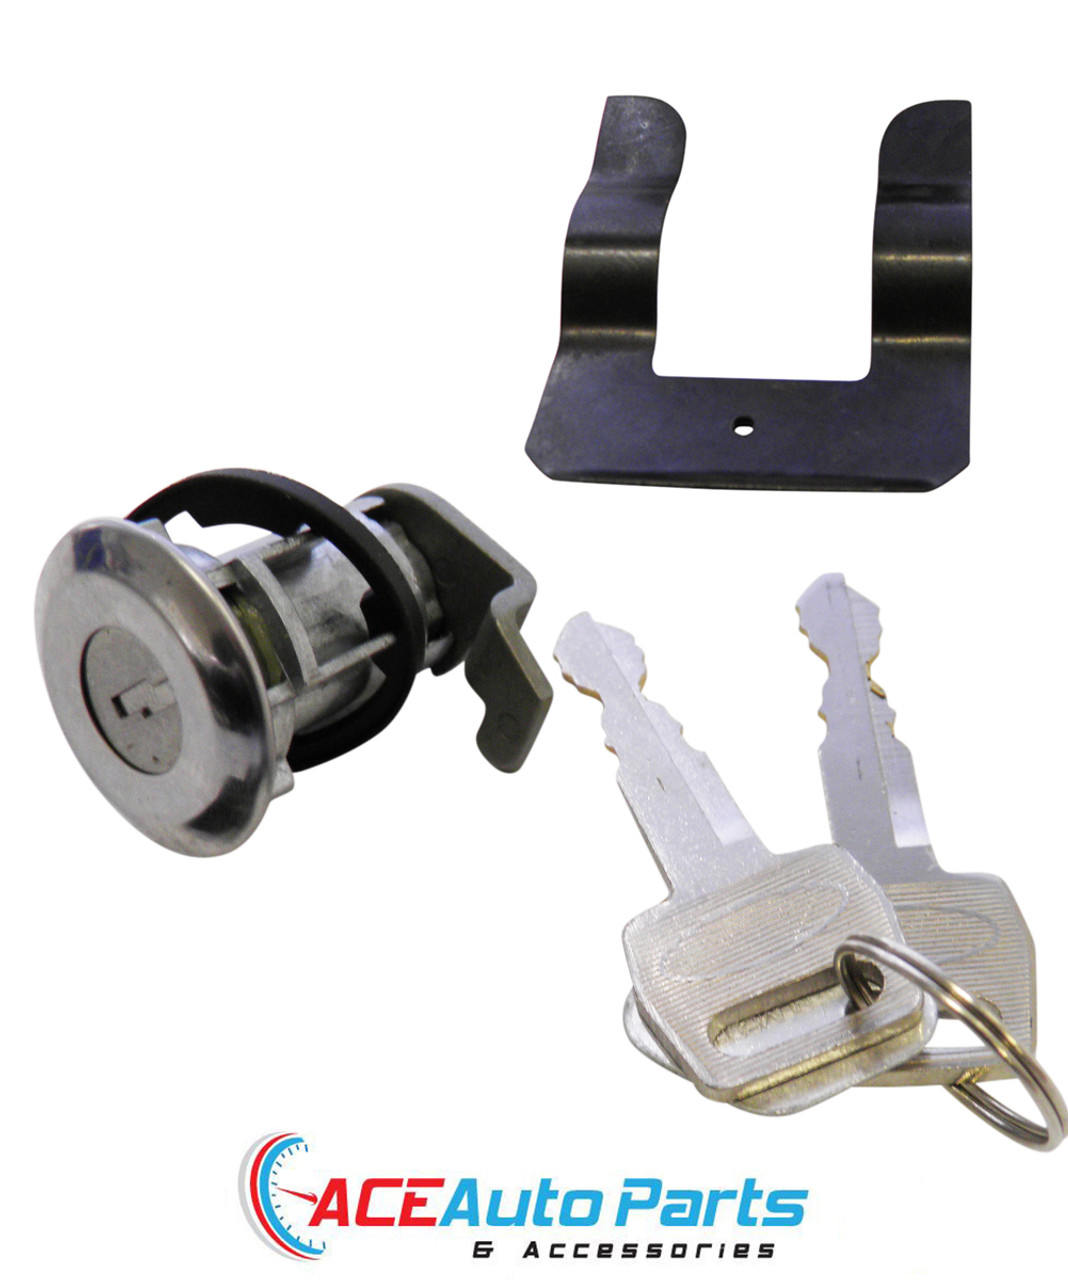 Tailgate Lock For Ford Falcon XD XE XF Station Wagon.